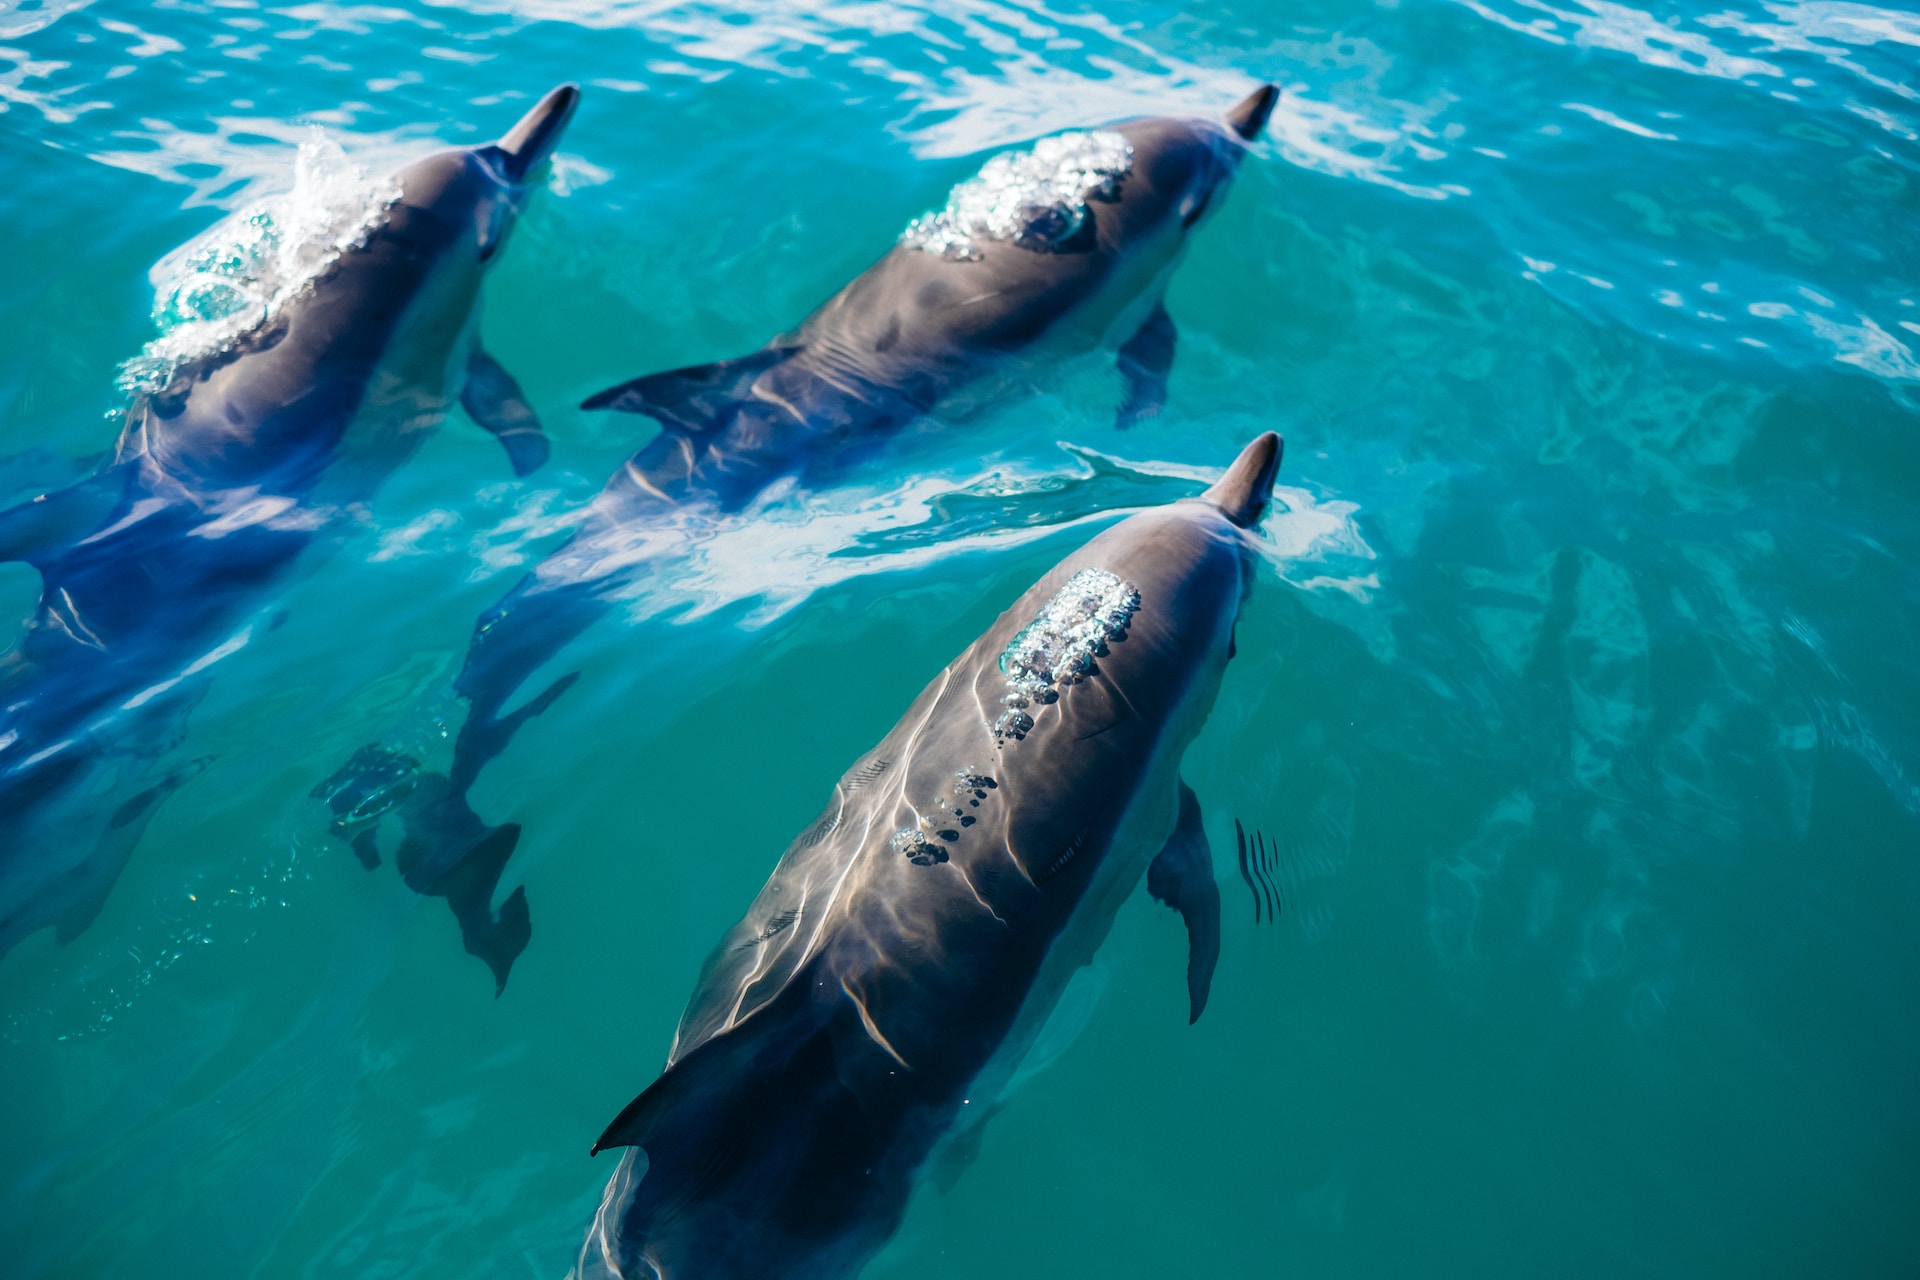 dolphins in the ocean